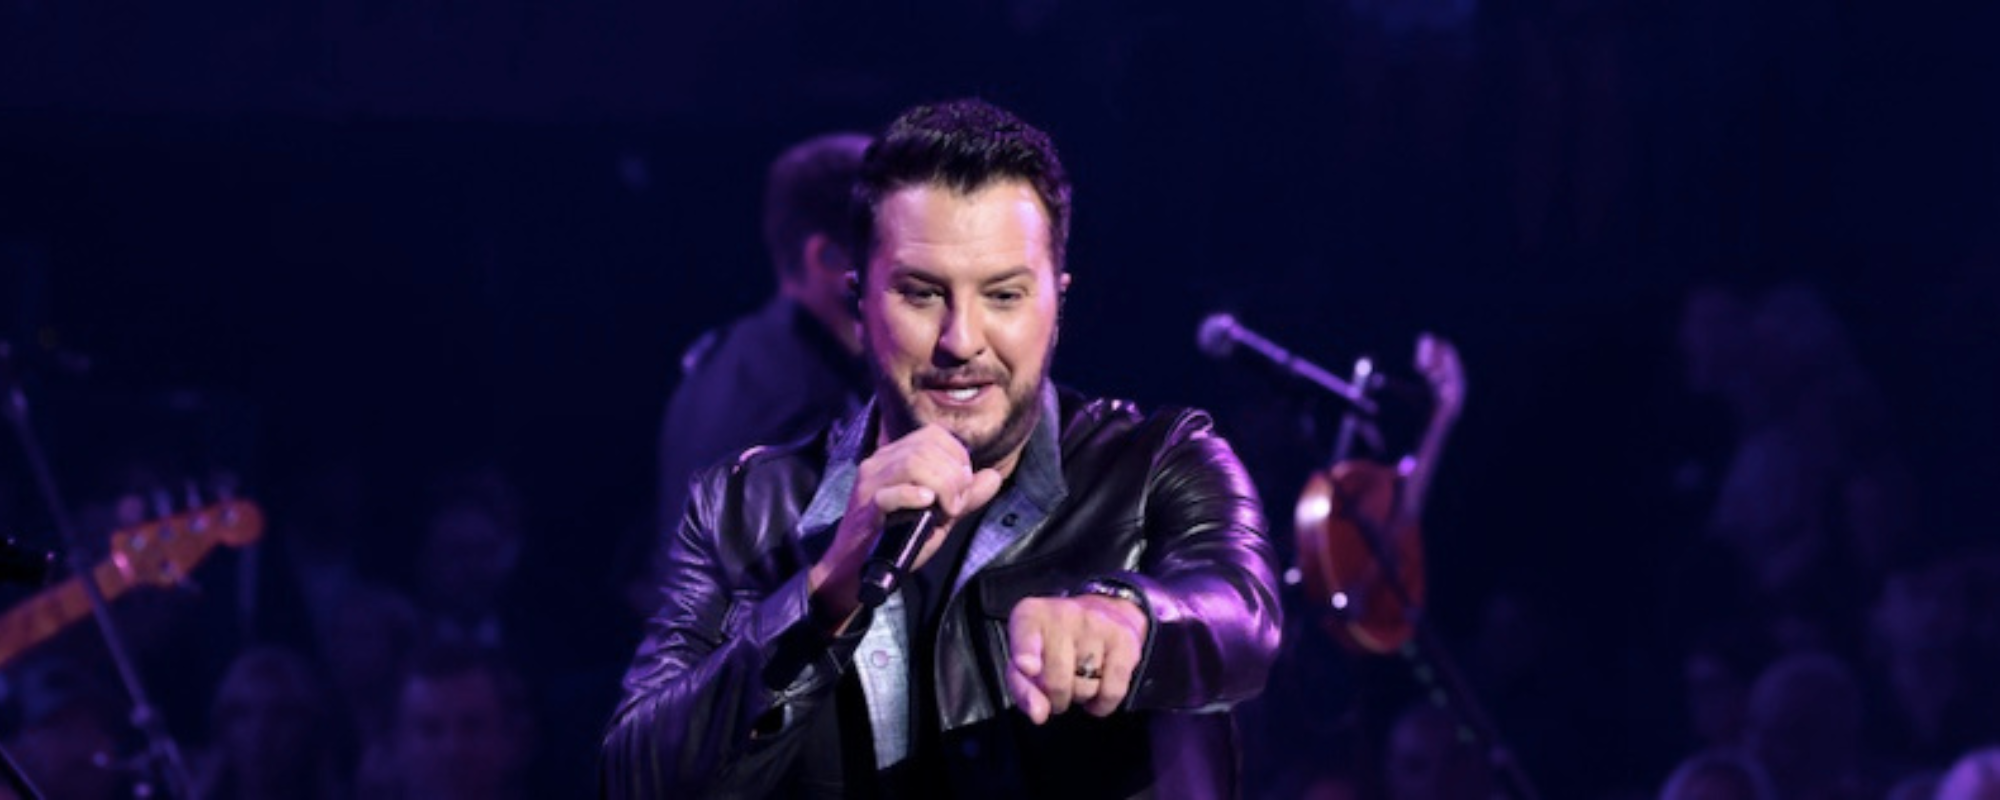 Luke Bryan Celebrates His Many No. 1 Hits with Five-Song Medley for 2023 CMA Awards